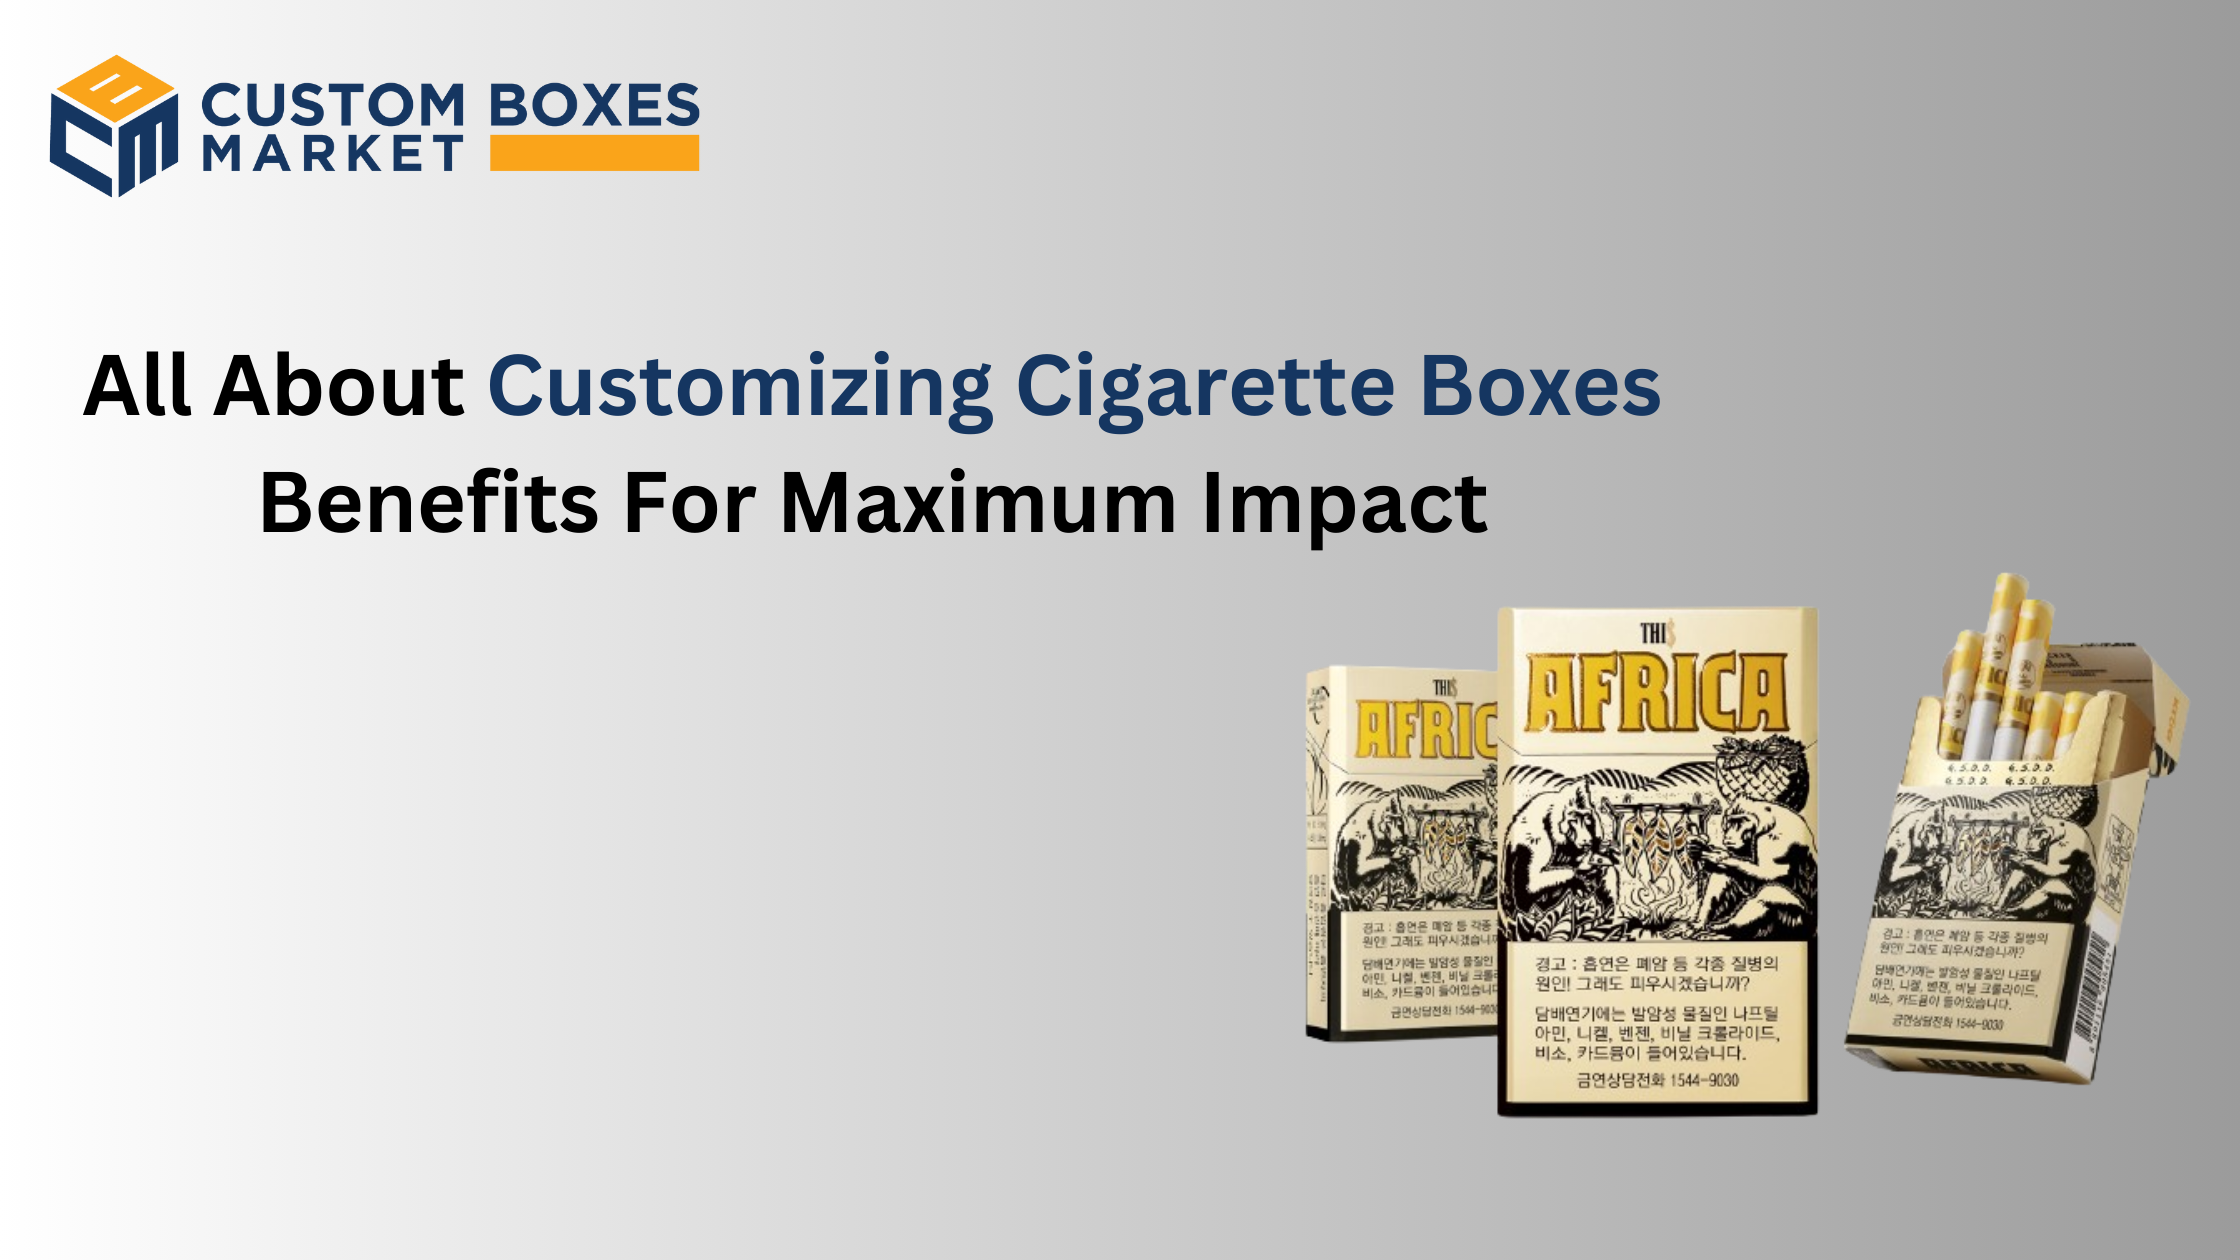 All About Customizing Cigarette Boxes Benefits For Maximum Impact